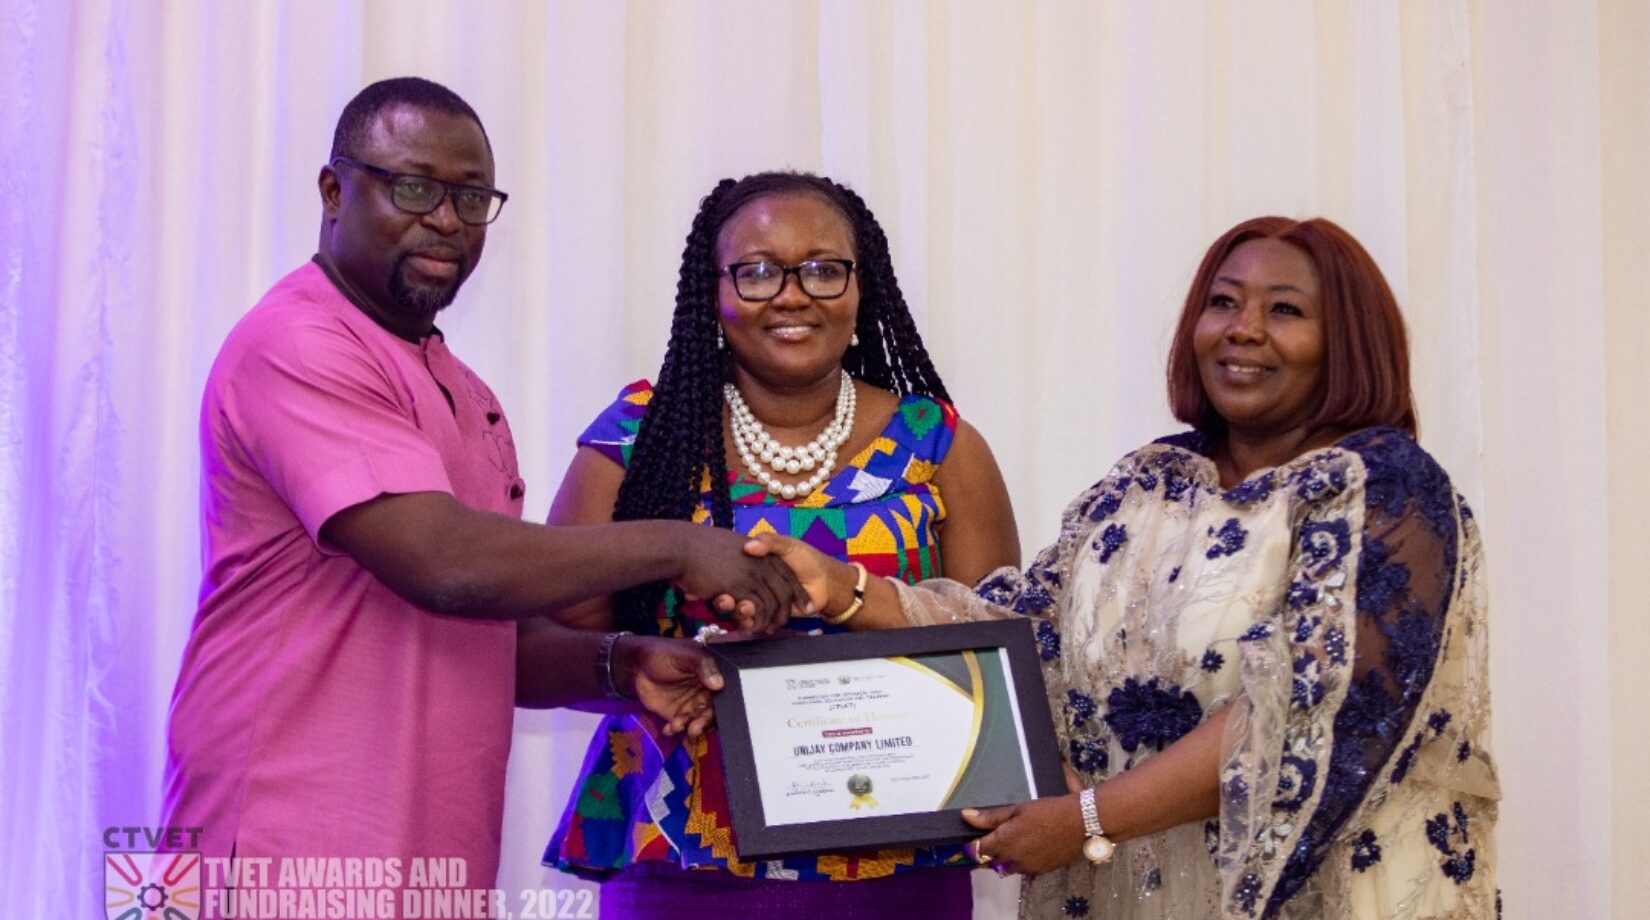 CTVET honour students, tutors, sponsors and development partners at maiden awards in Accra